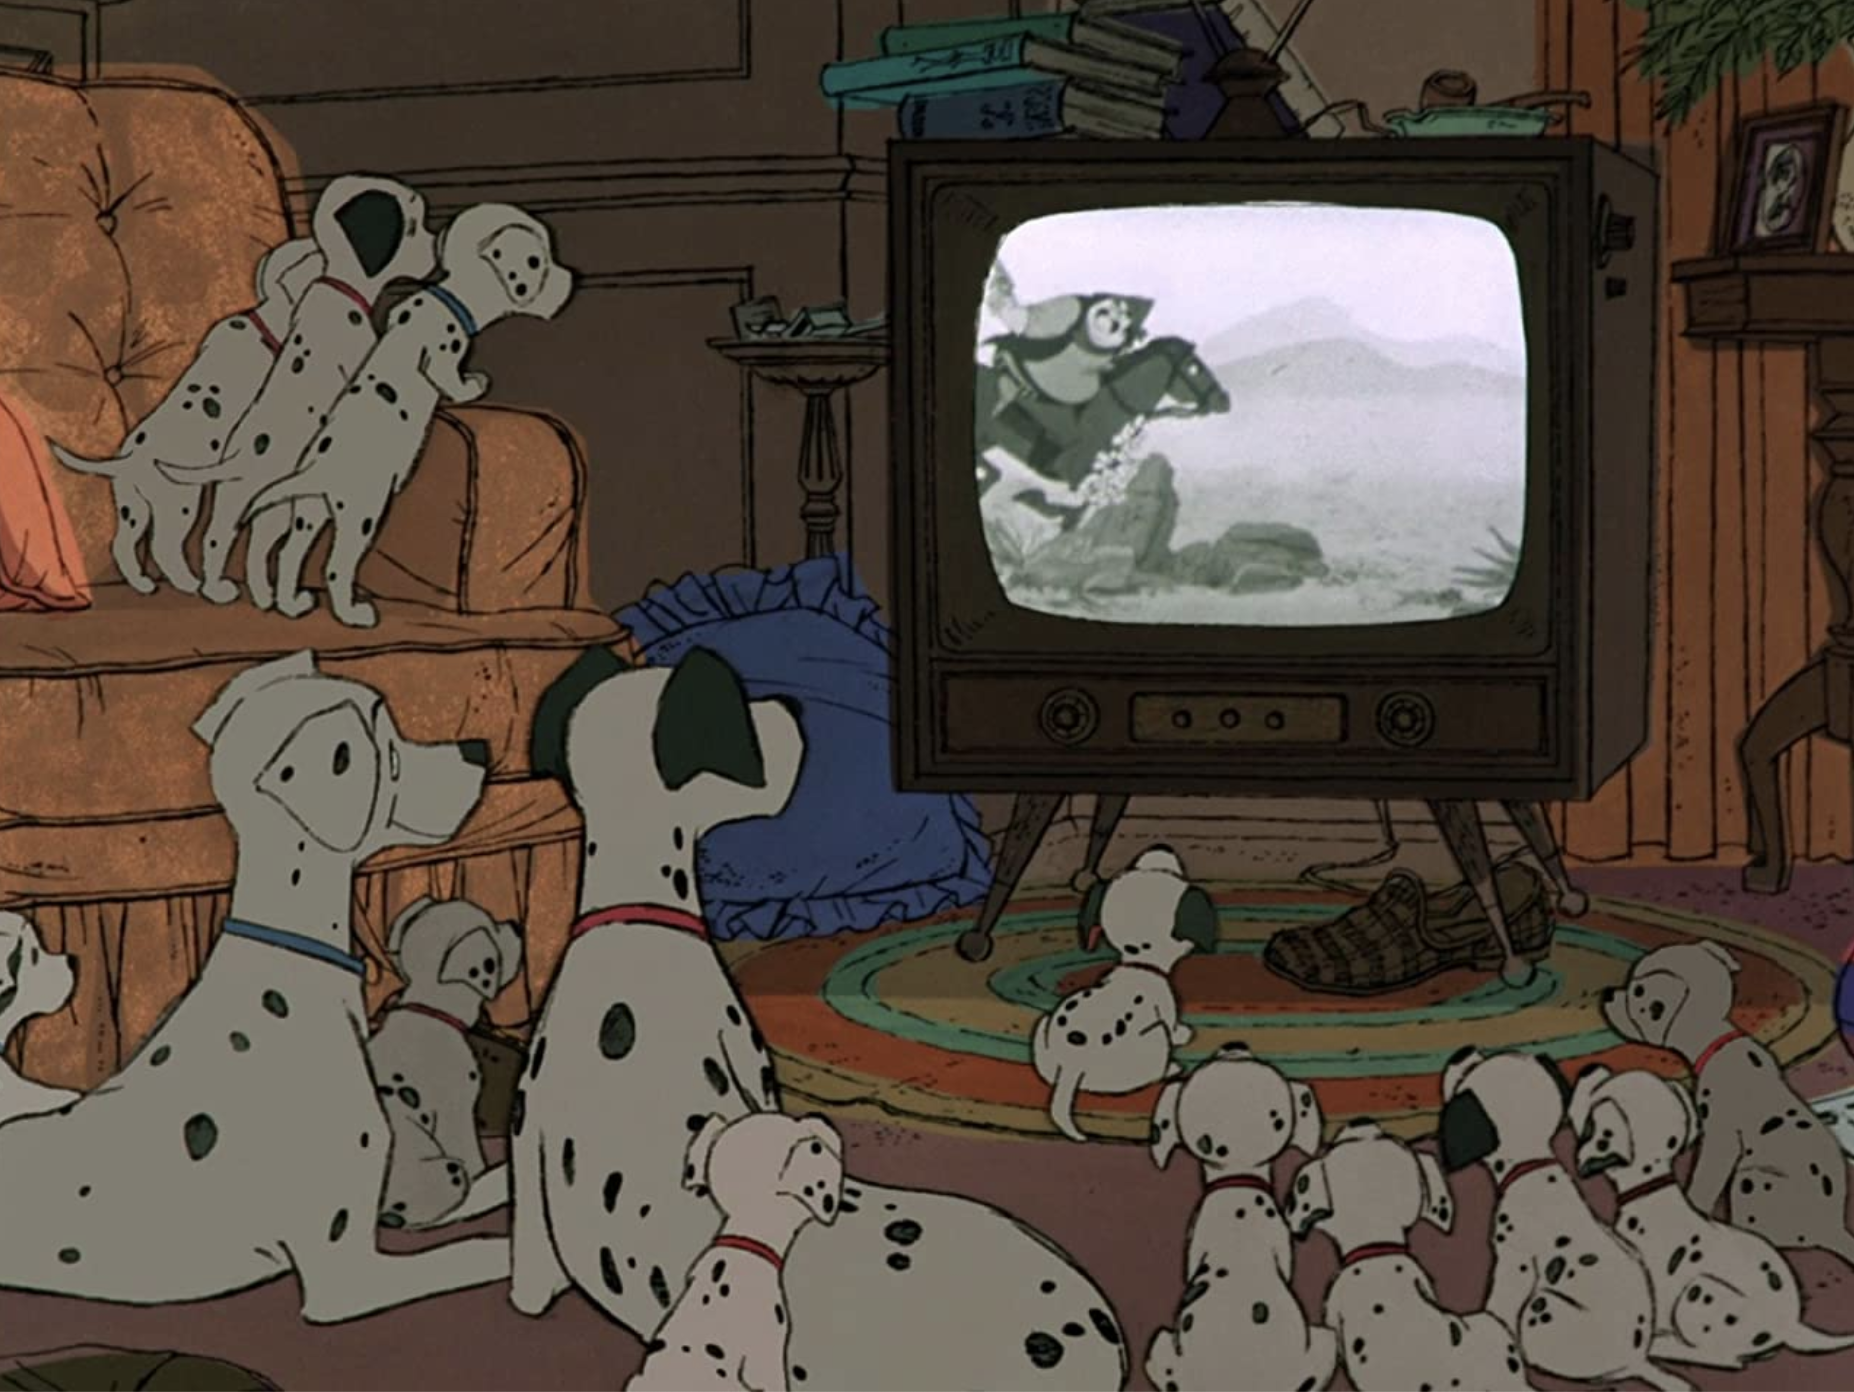 101 Dalmatians 1960, directed by Wolfgang Reitherman, Hamilton Luske and  Clyde Geronimi